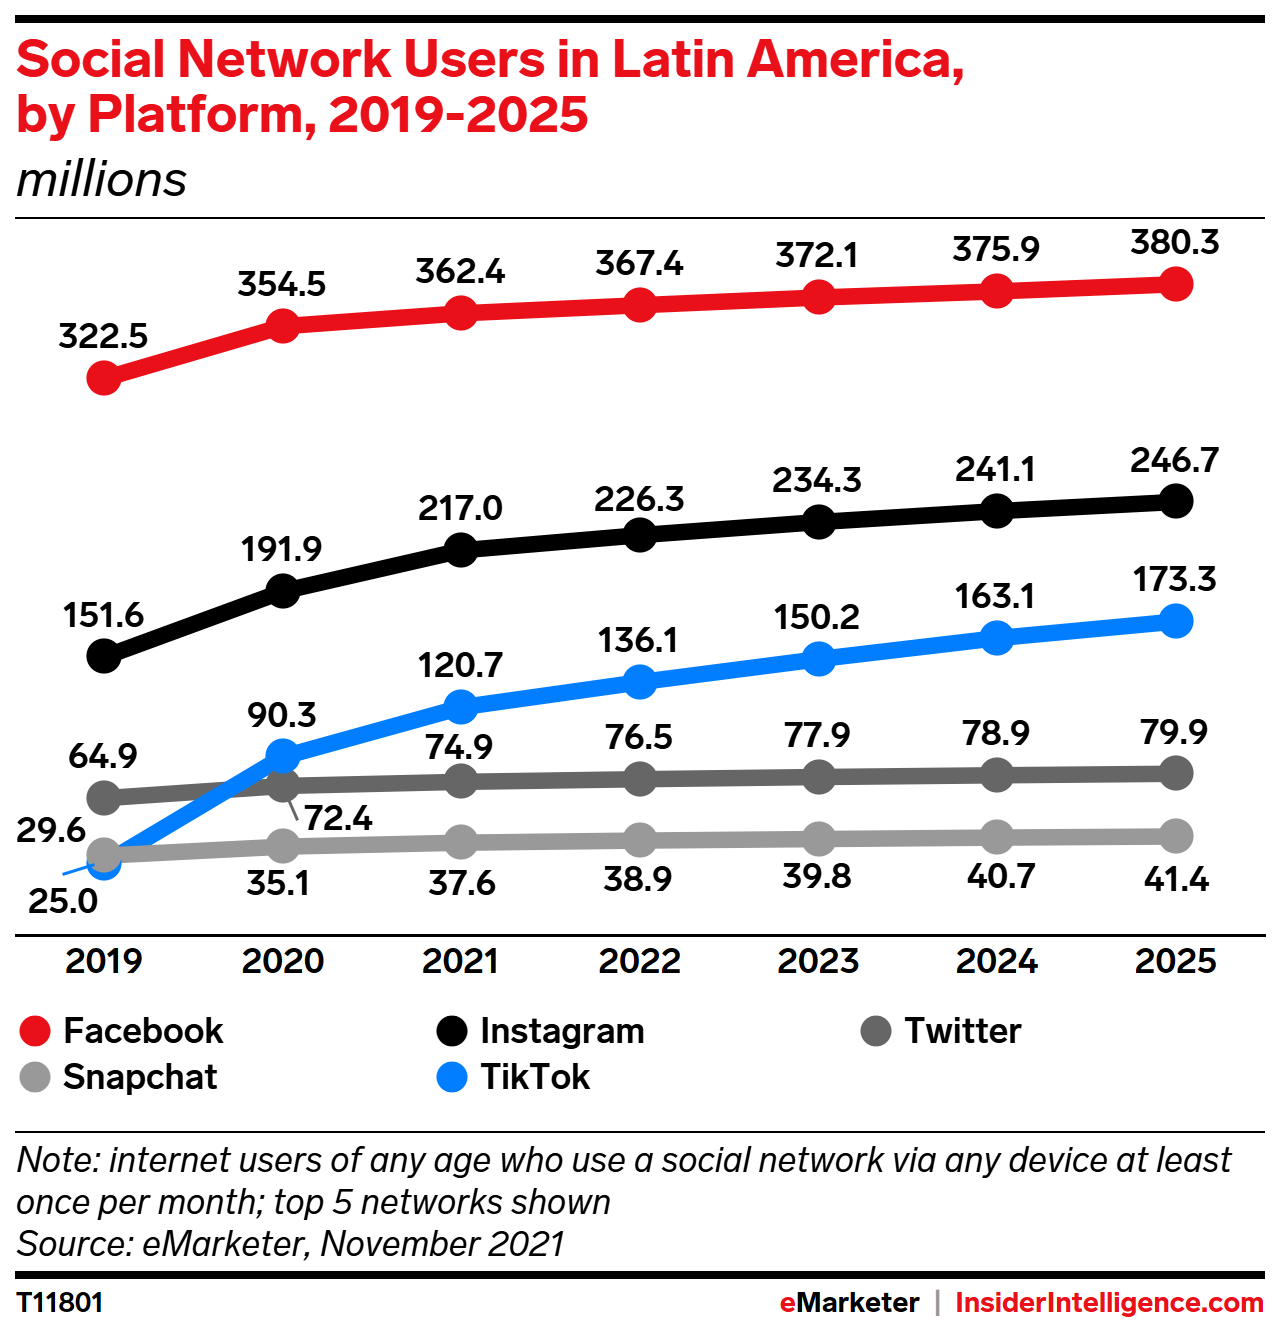 Social Network Users in Latin America, by Platform, 2019-2025 (millions)